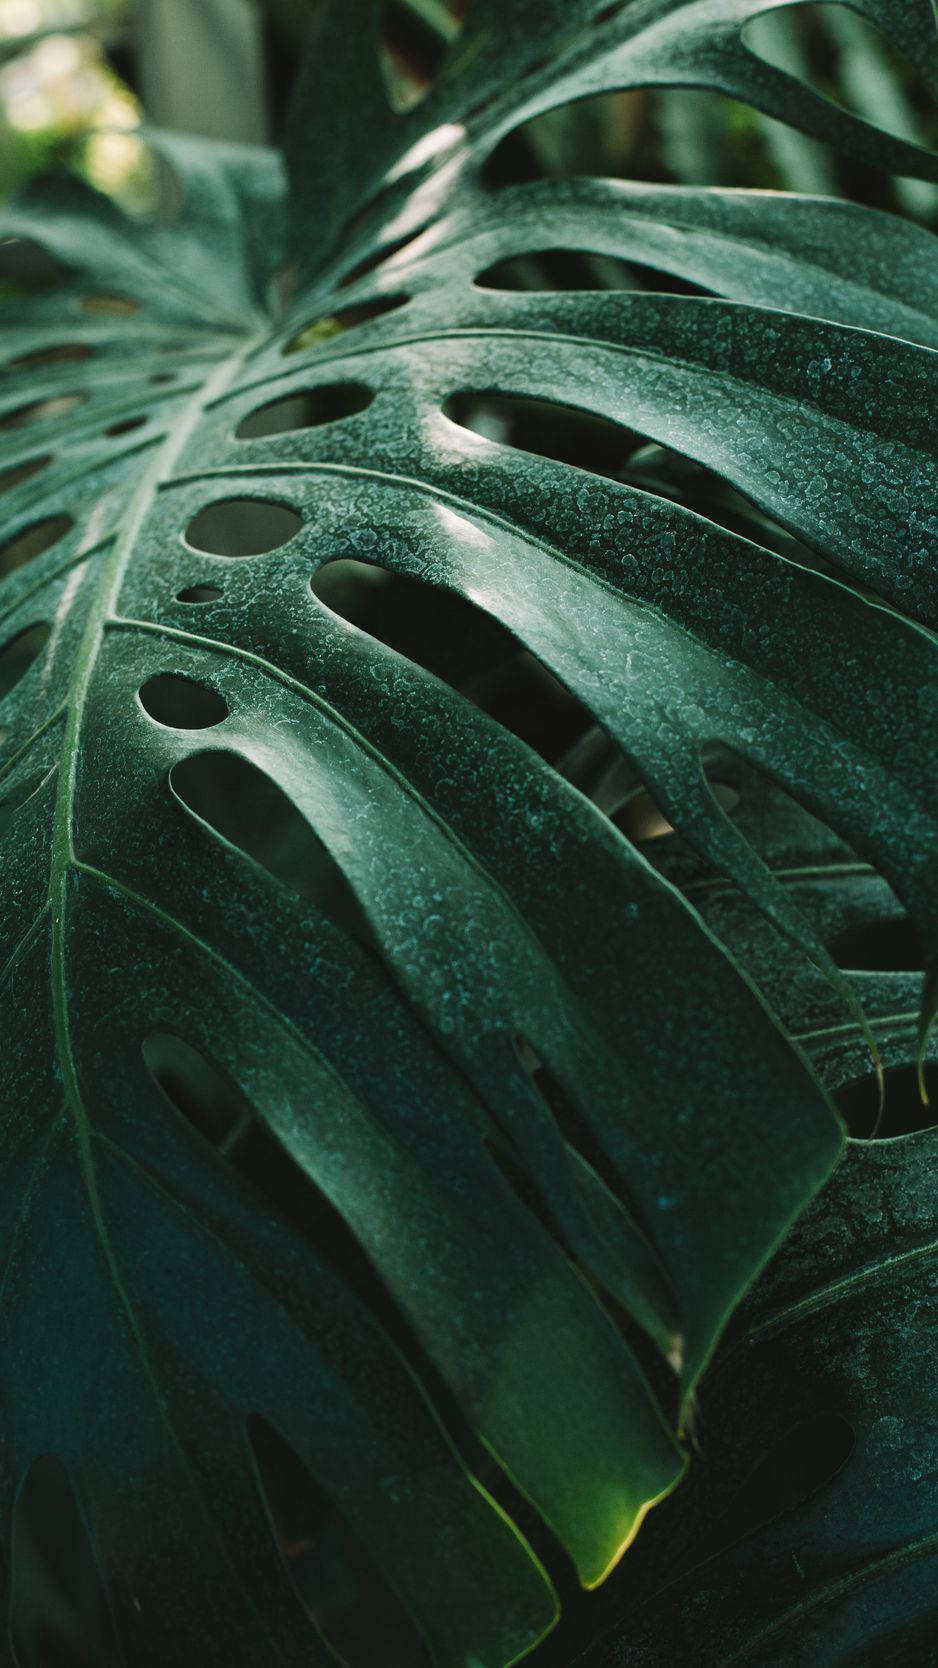 Send A Message Of Nature And Technology With This Plant Iphone Wallpaper Wallpaper